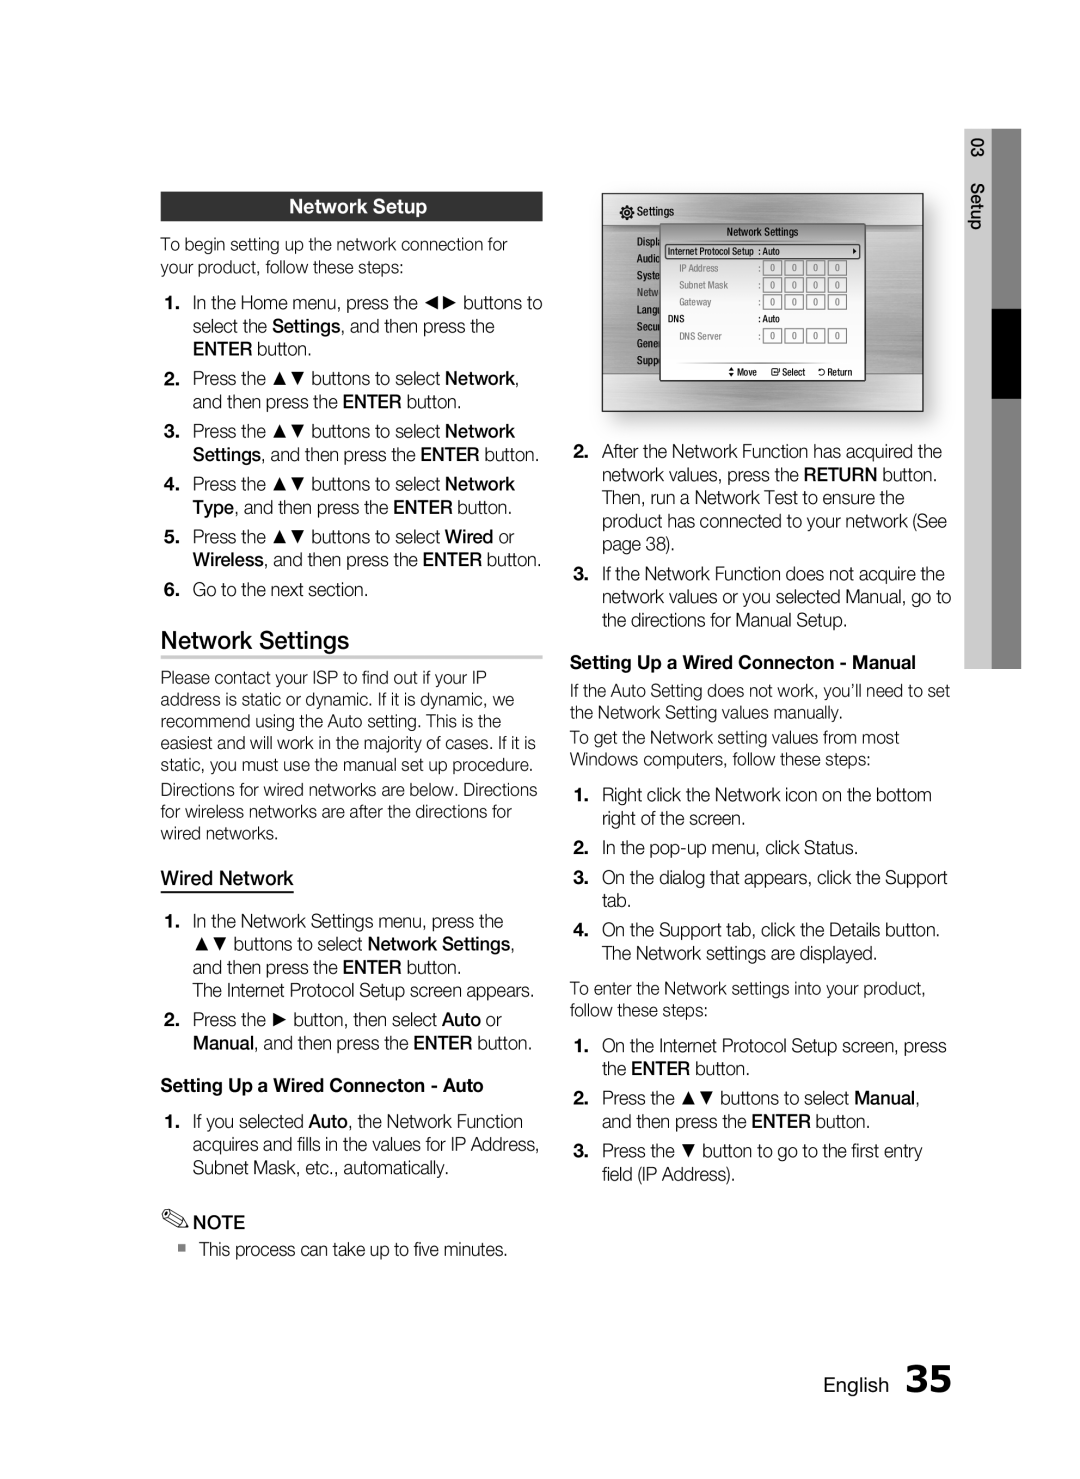 Samsung HT-C5200 user manual Network Settings, Network Setup, Wired Network, English 